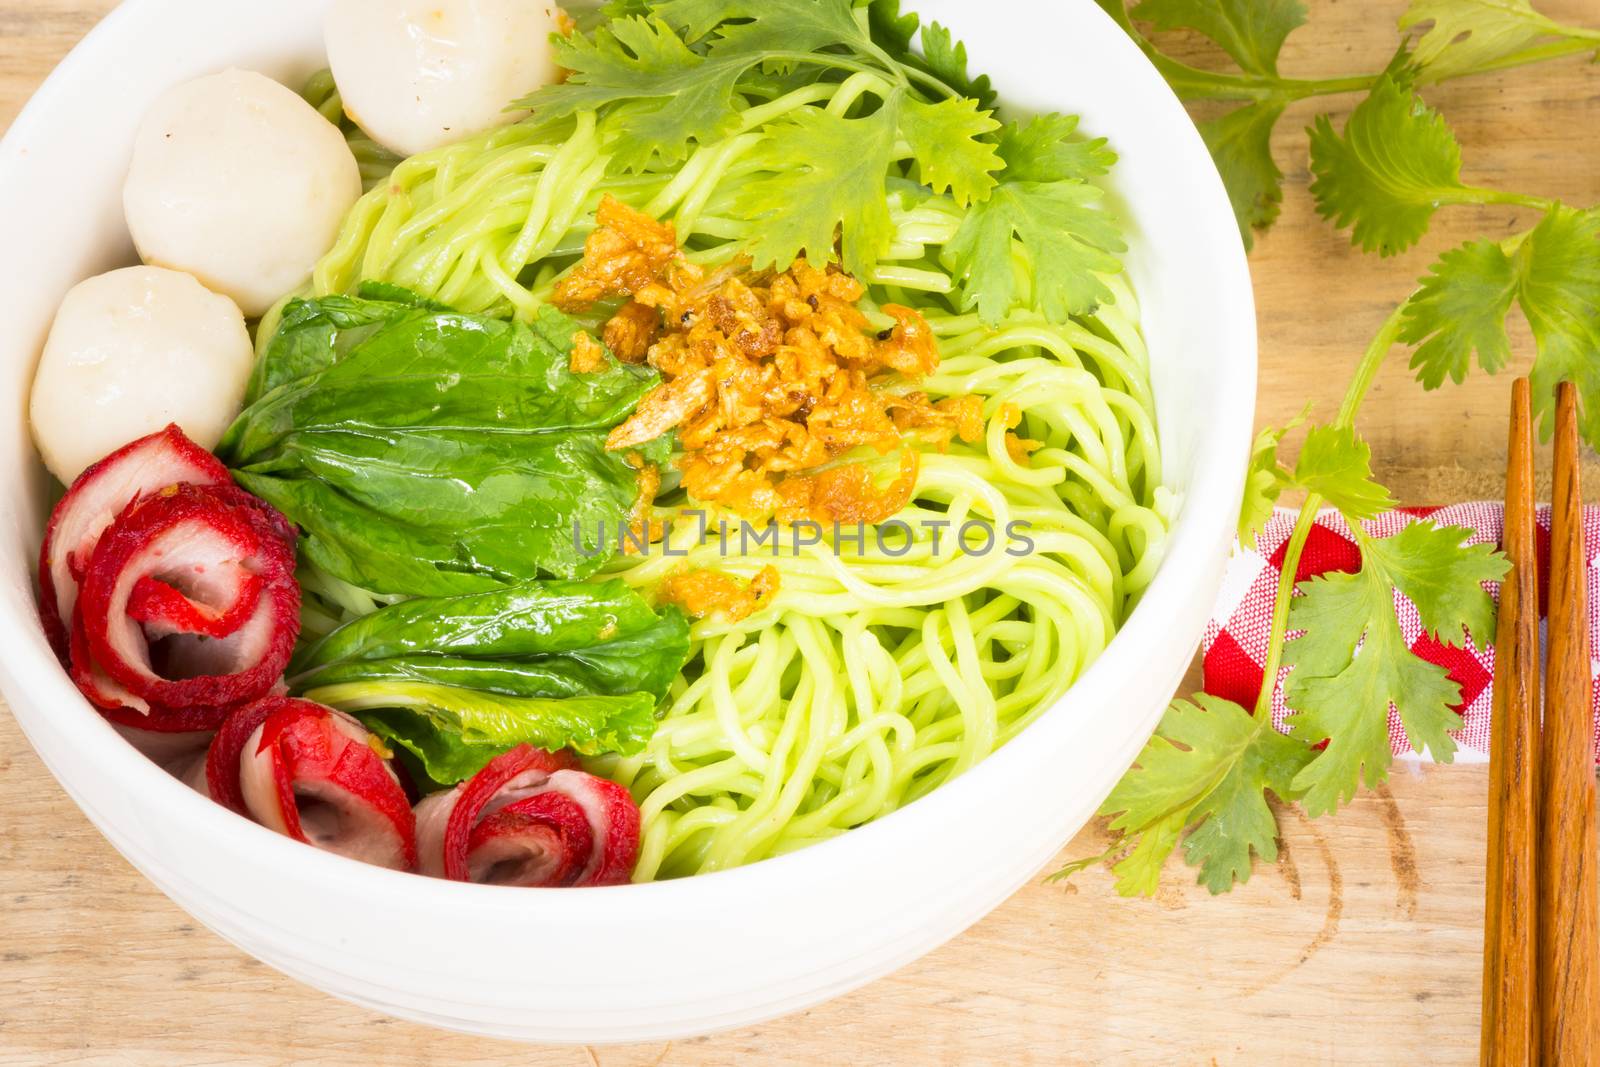 Noodles in Thailand Ba-Mee-Moo-Dang  or pasta of Asia on wooden table.Close up and top view.0021 by engphoto